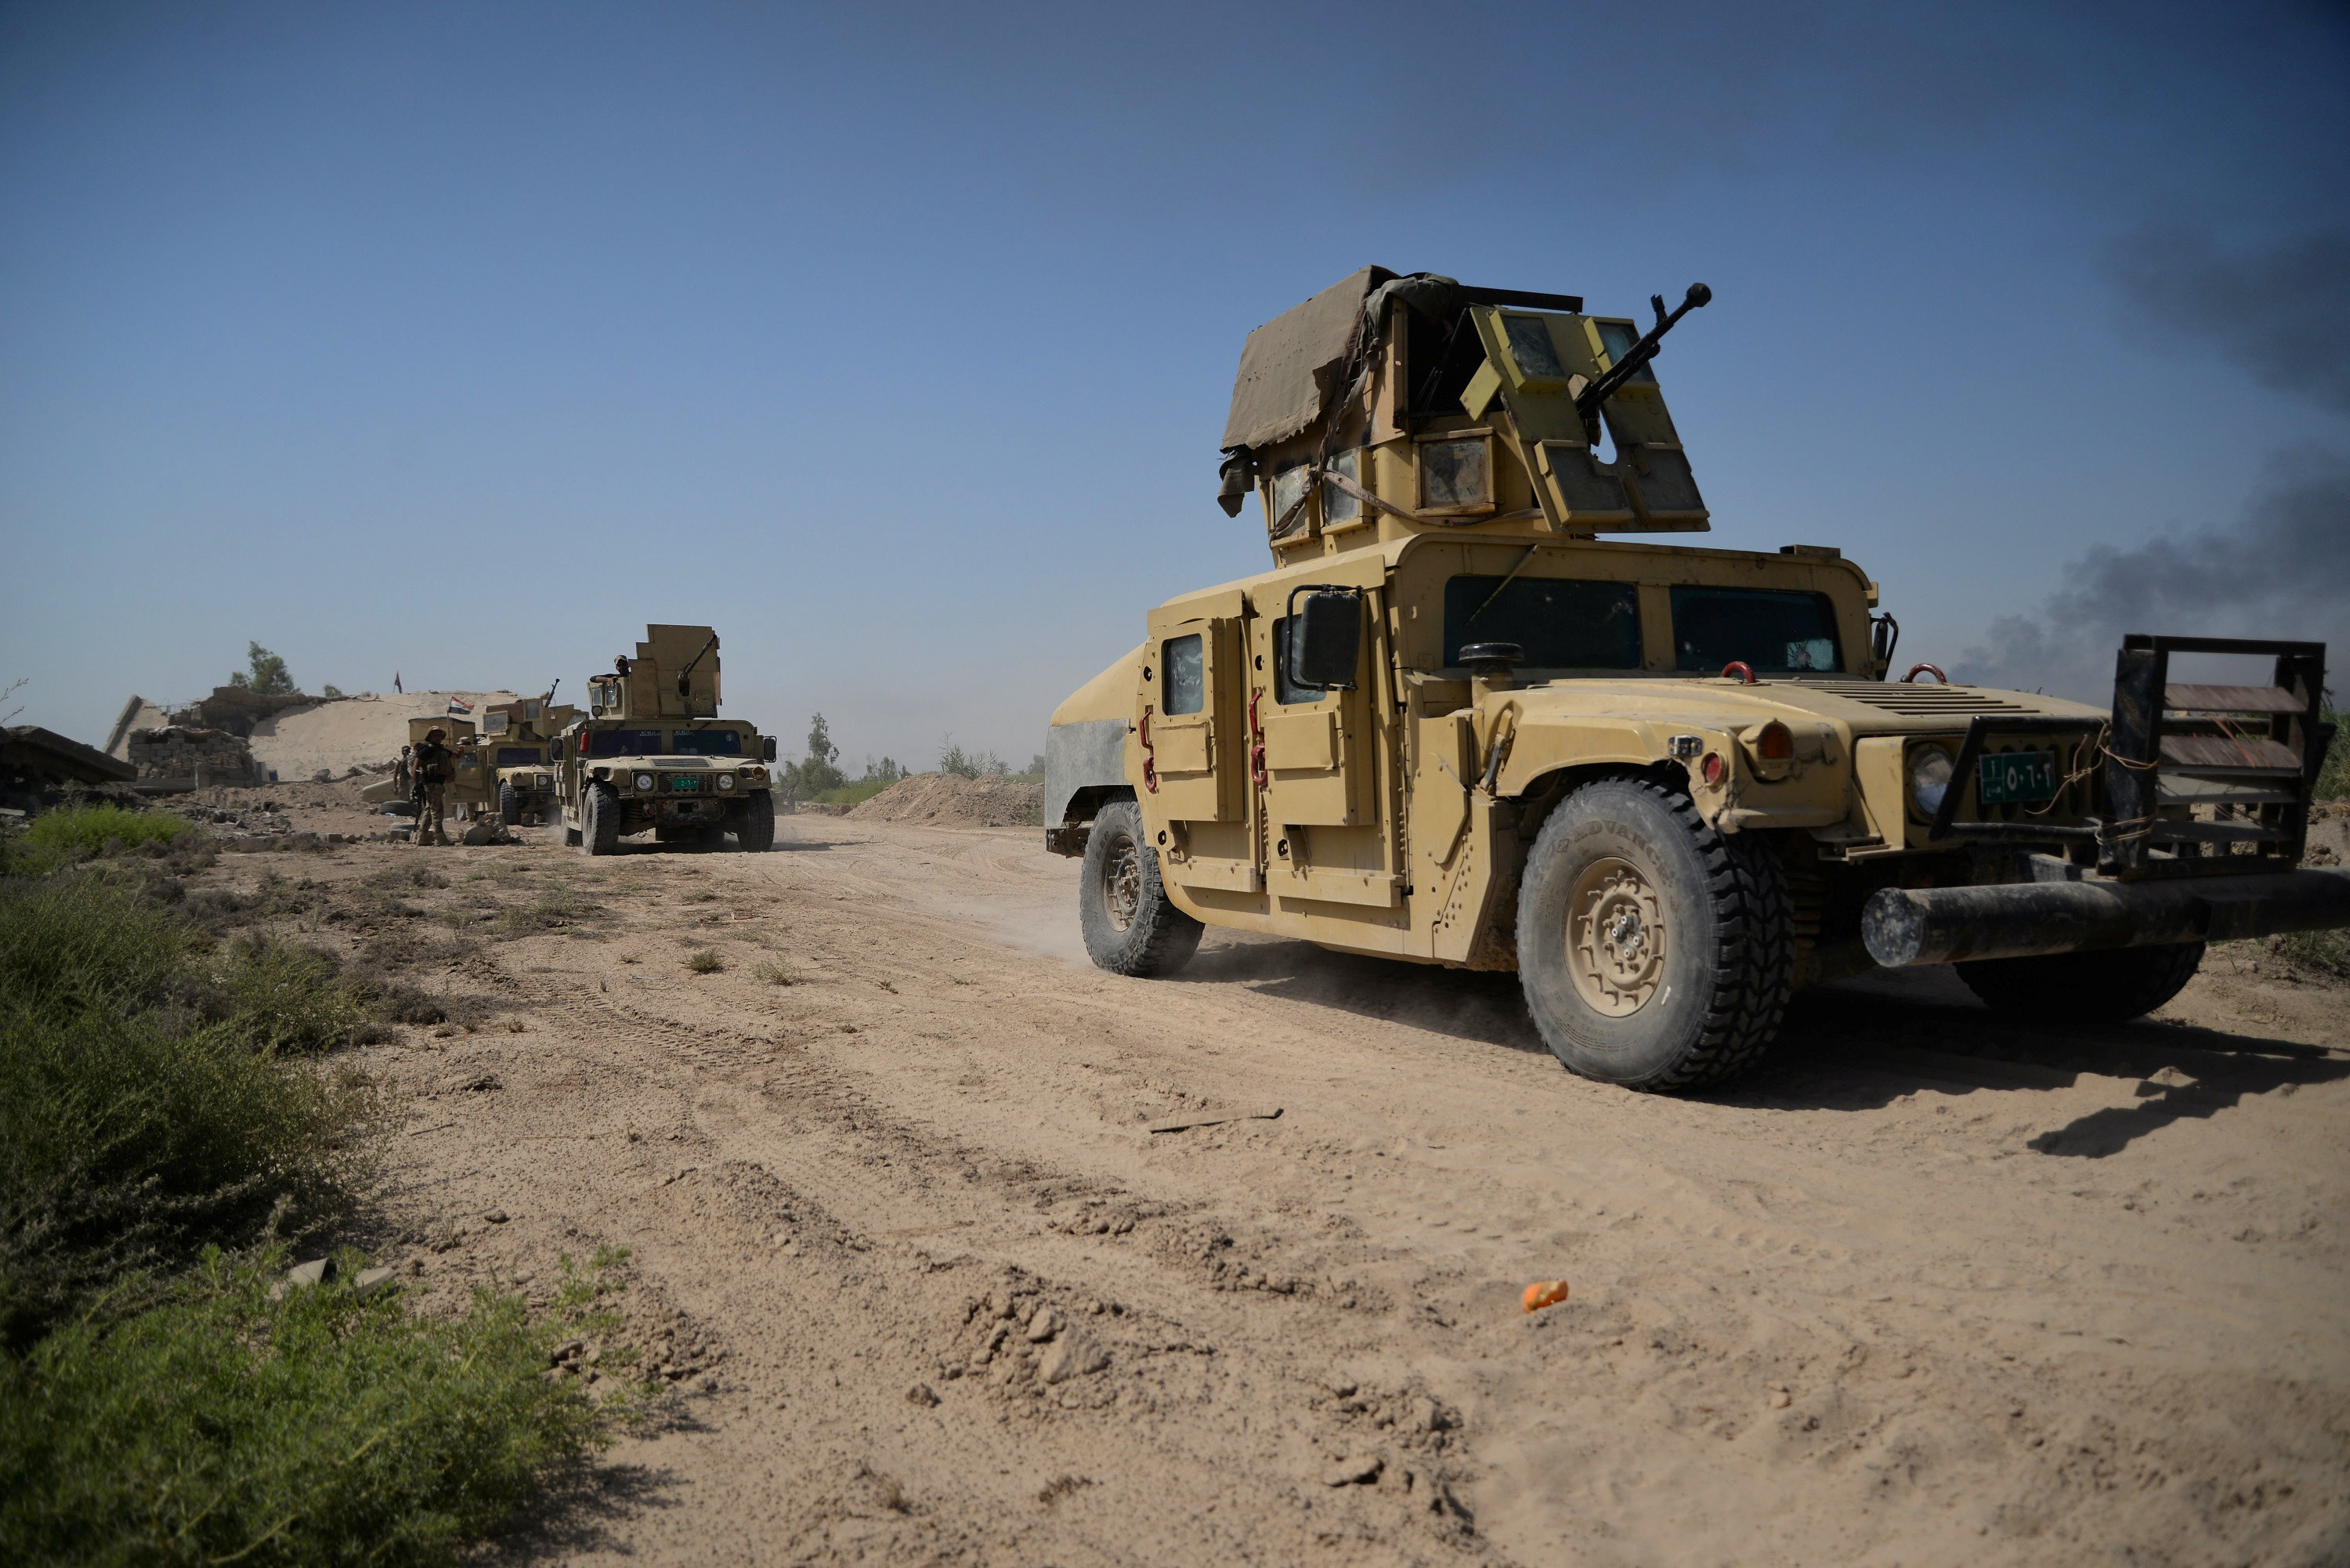 Vehicles of the Iraqi security forces are seen on the outskirts of Falluja